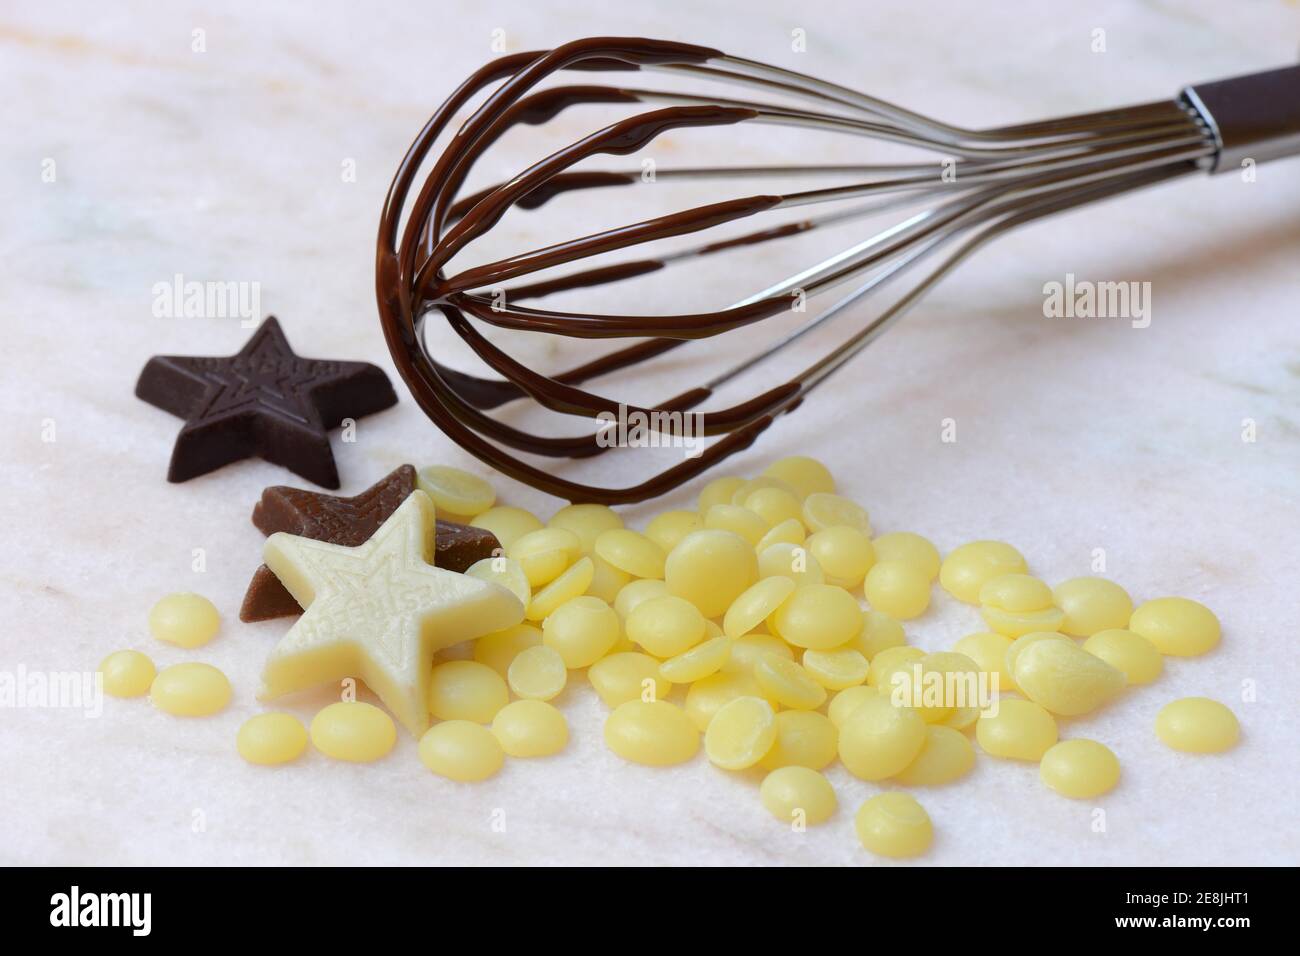 Cocoa butter and chocolate stars with whisk( Theobroma cacao) , cocoa, melted, chocolate ingredient Stock Photo